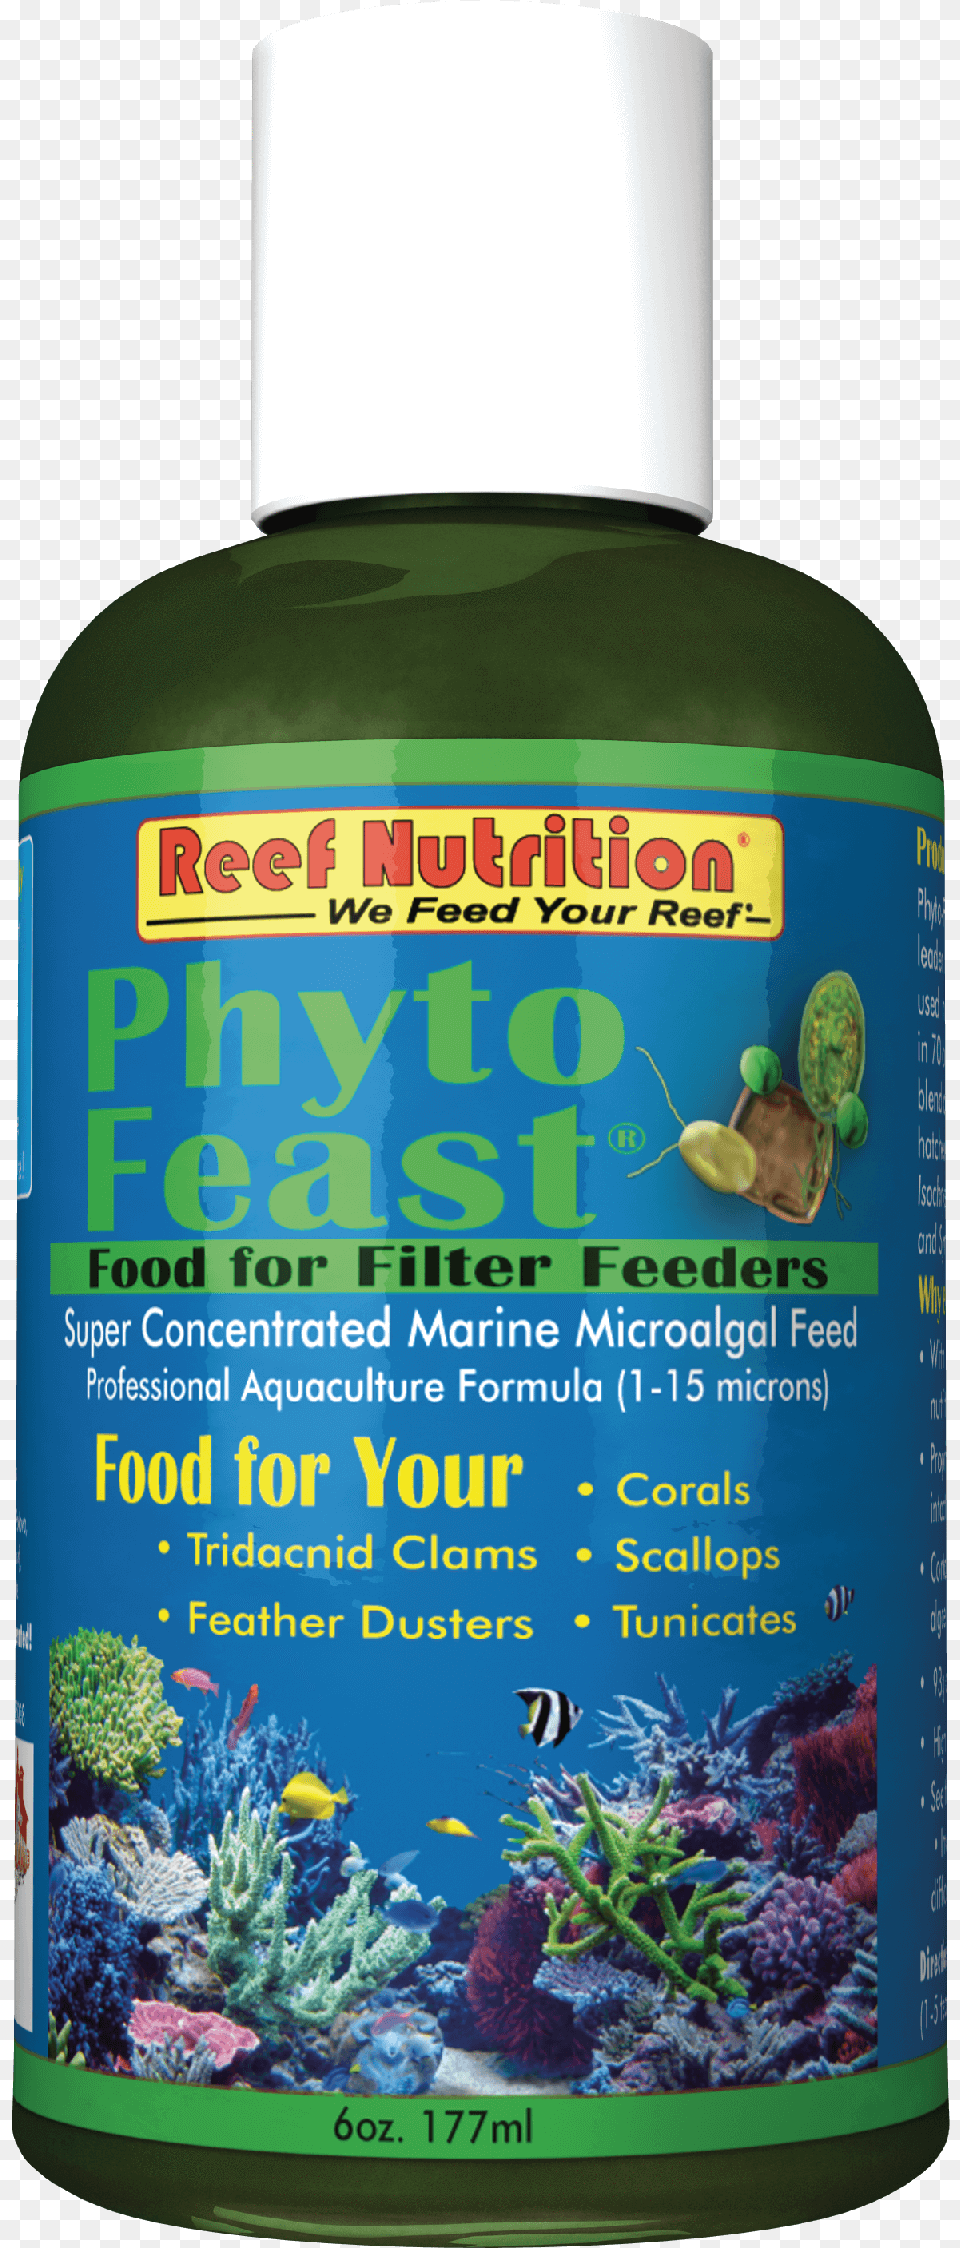 Reef Nutrition Phyto Feast, Bottle, Animal, Sea Life, Sea Png Image